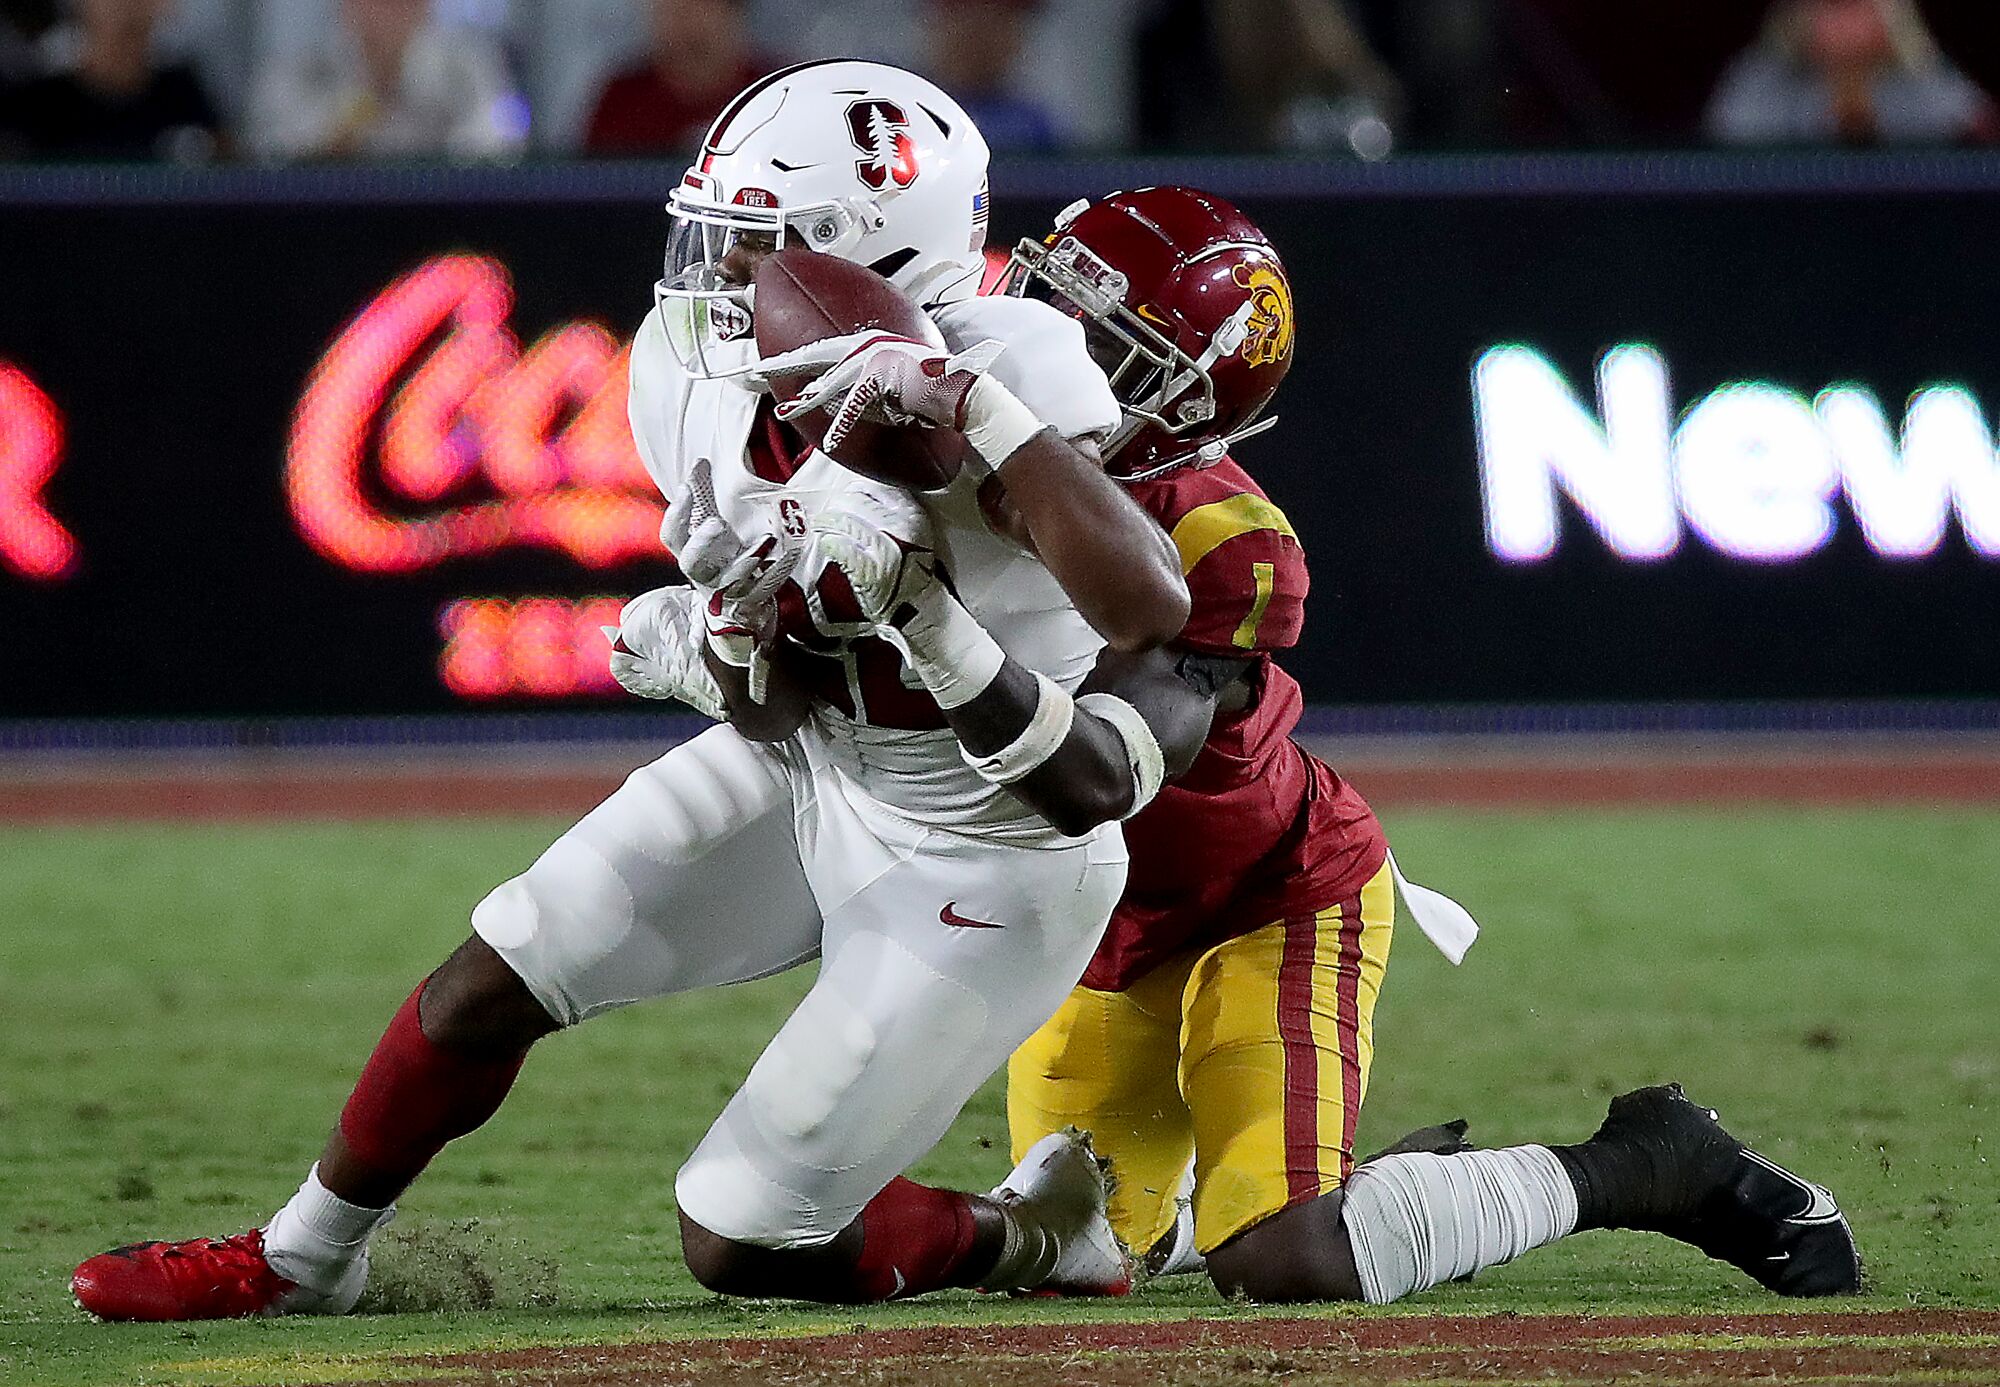 Stanford running back E.J. Smith makes a catch against USC defensive back Greg Johnson in the third quarter